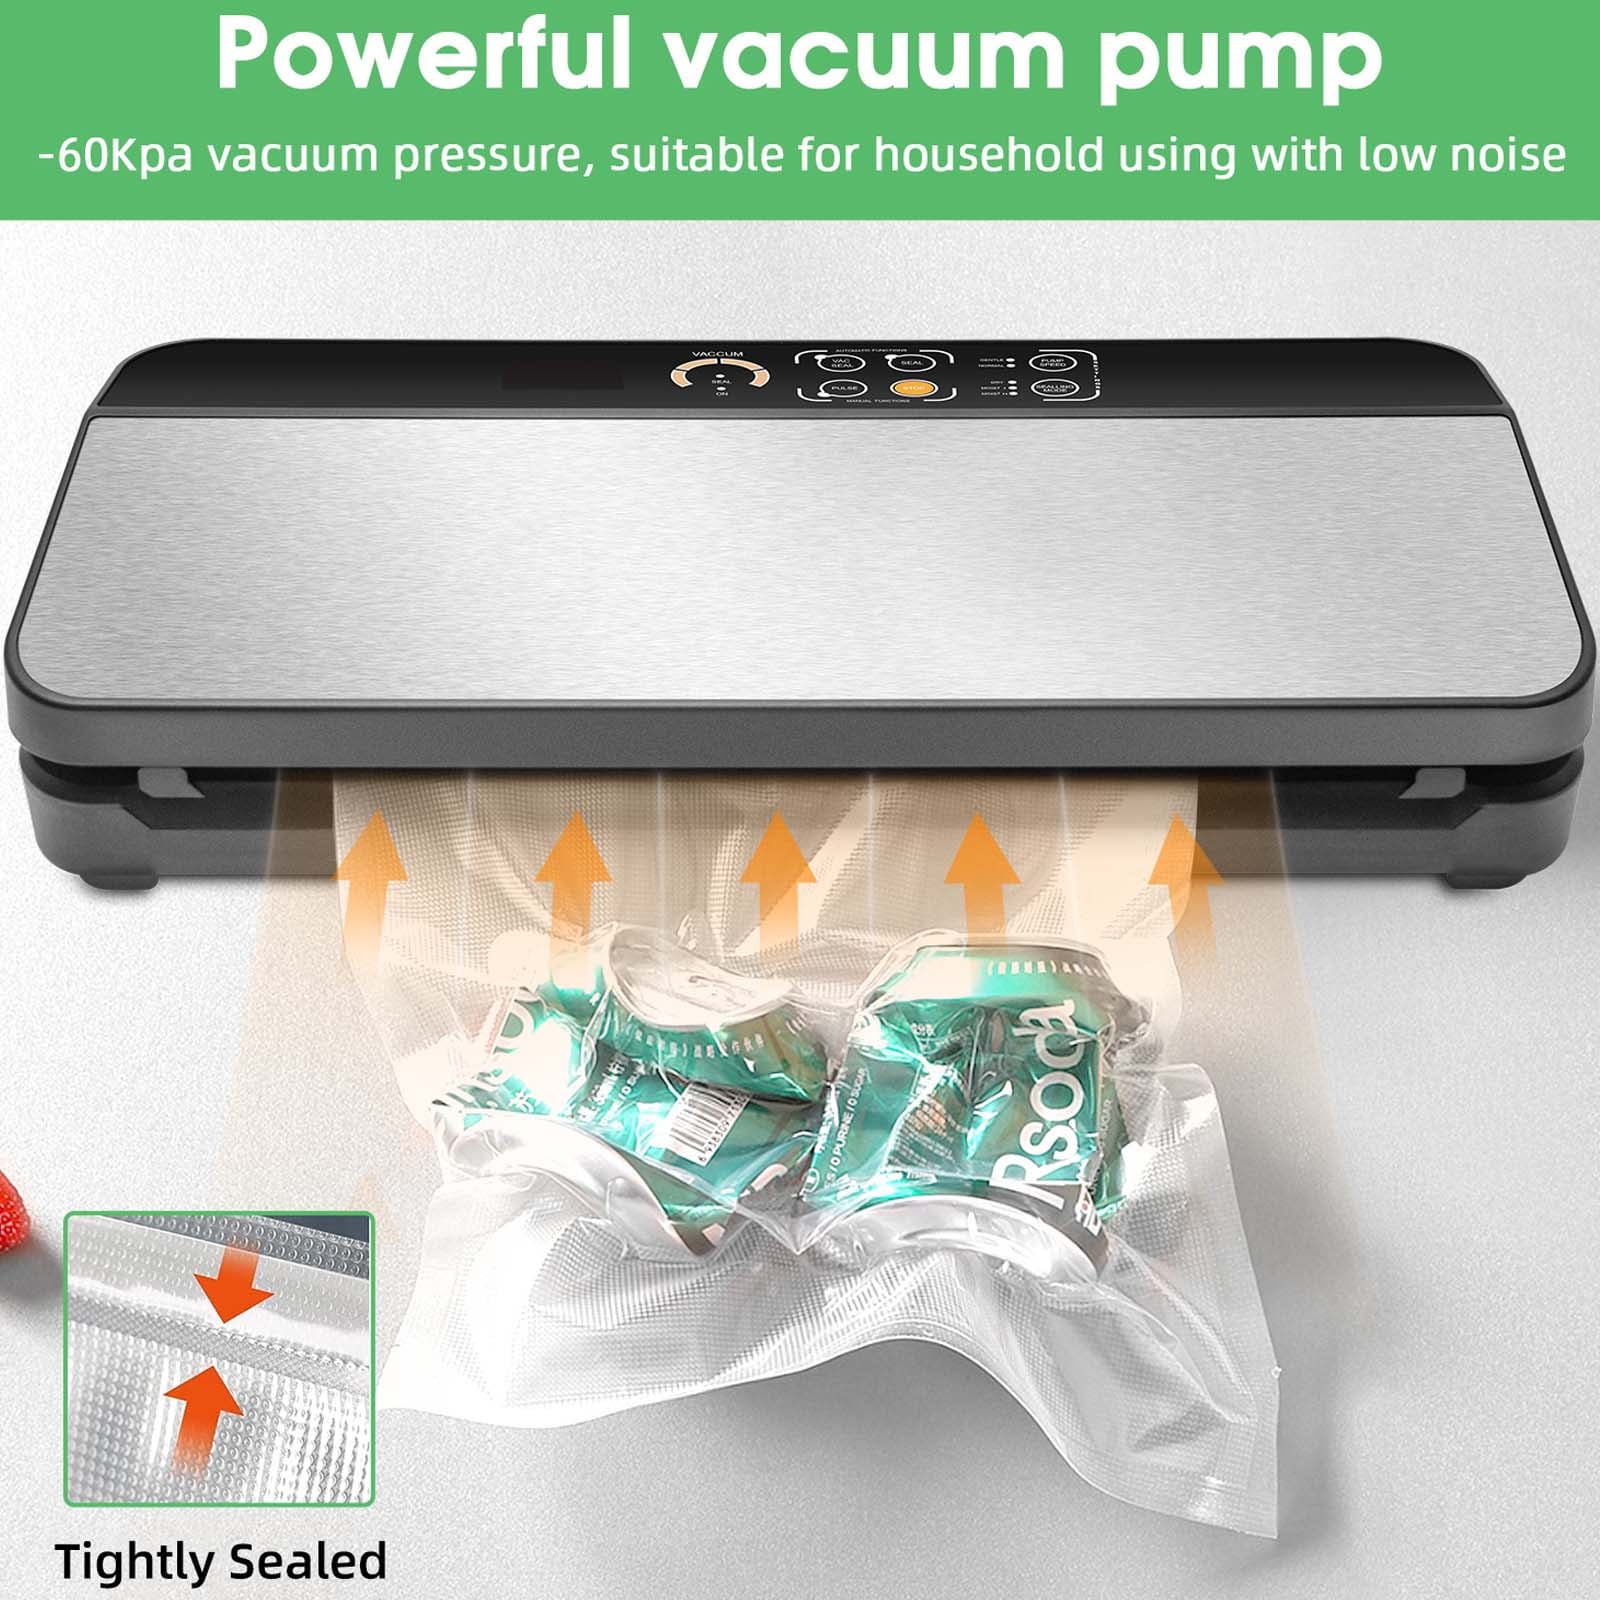 Household Megawise Vacuum Sealer With 15 Bags Automatic 90W Food Packing  Machine For Dry & Moist Foods From King128, $29.71